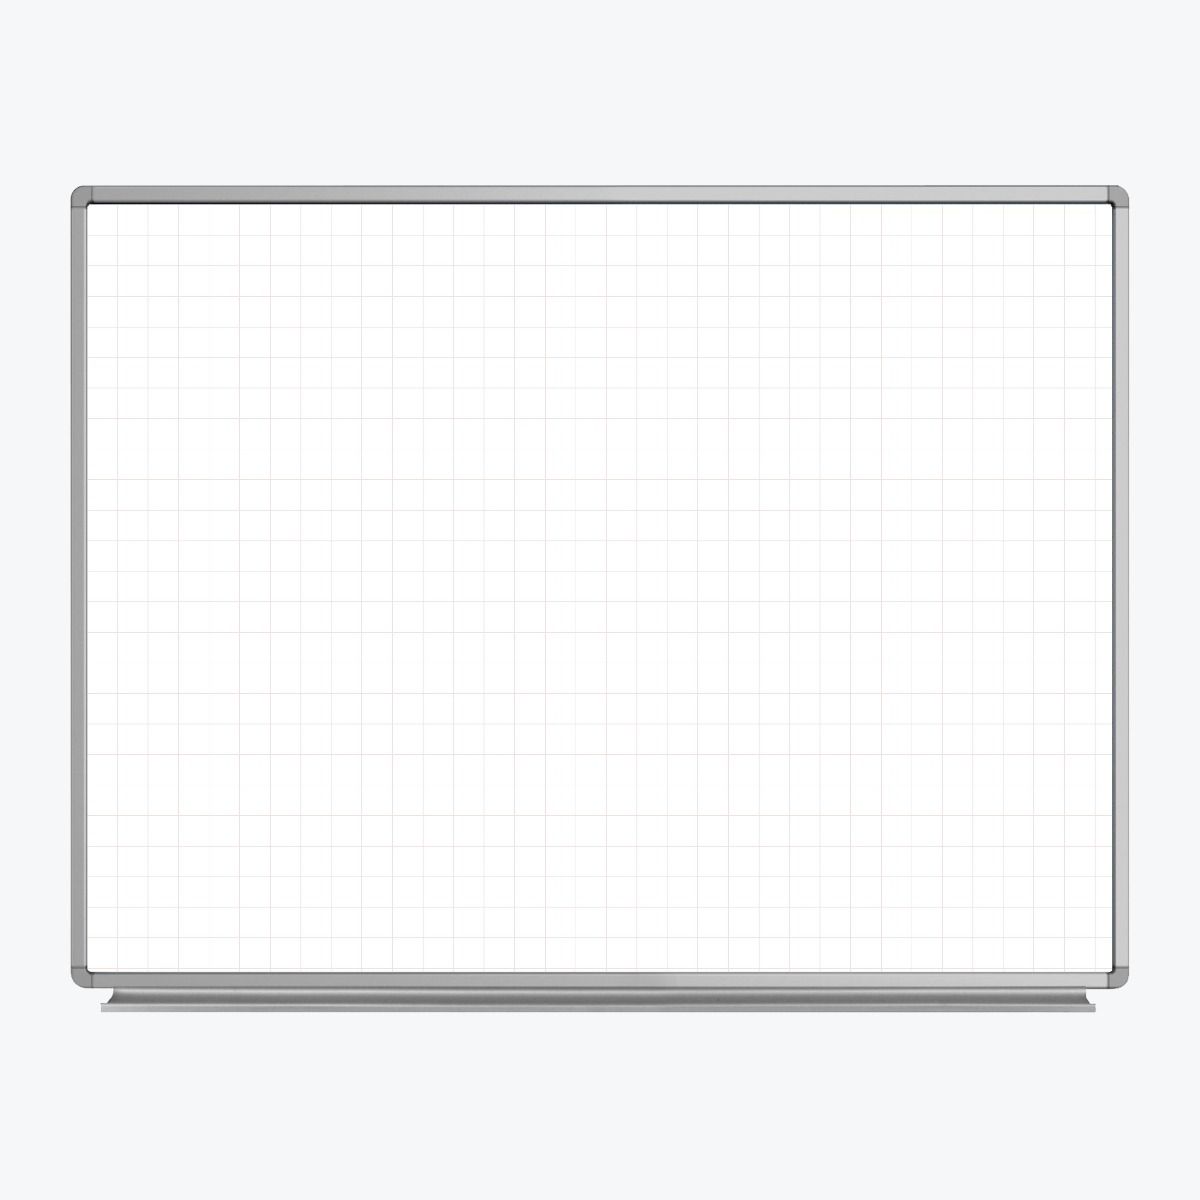 Wb4836lb 48 X 36 In. Wall Mounted Magnetic Ghost Grid Whiteboard